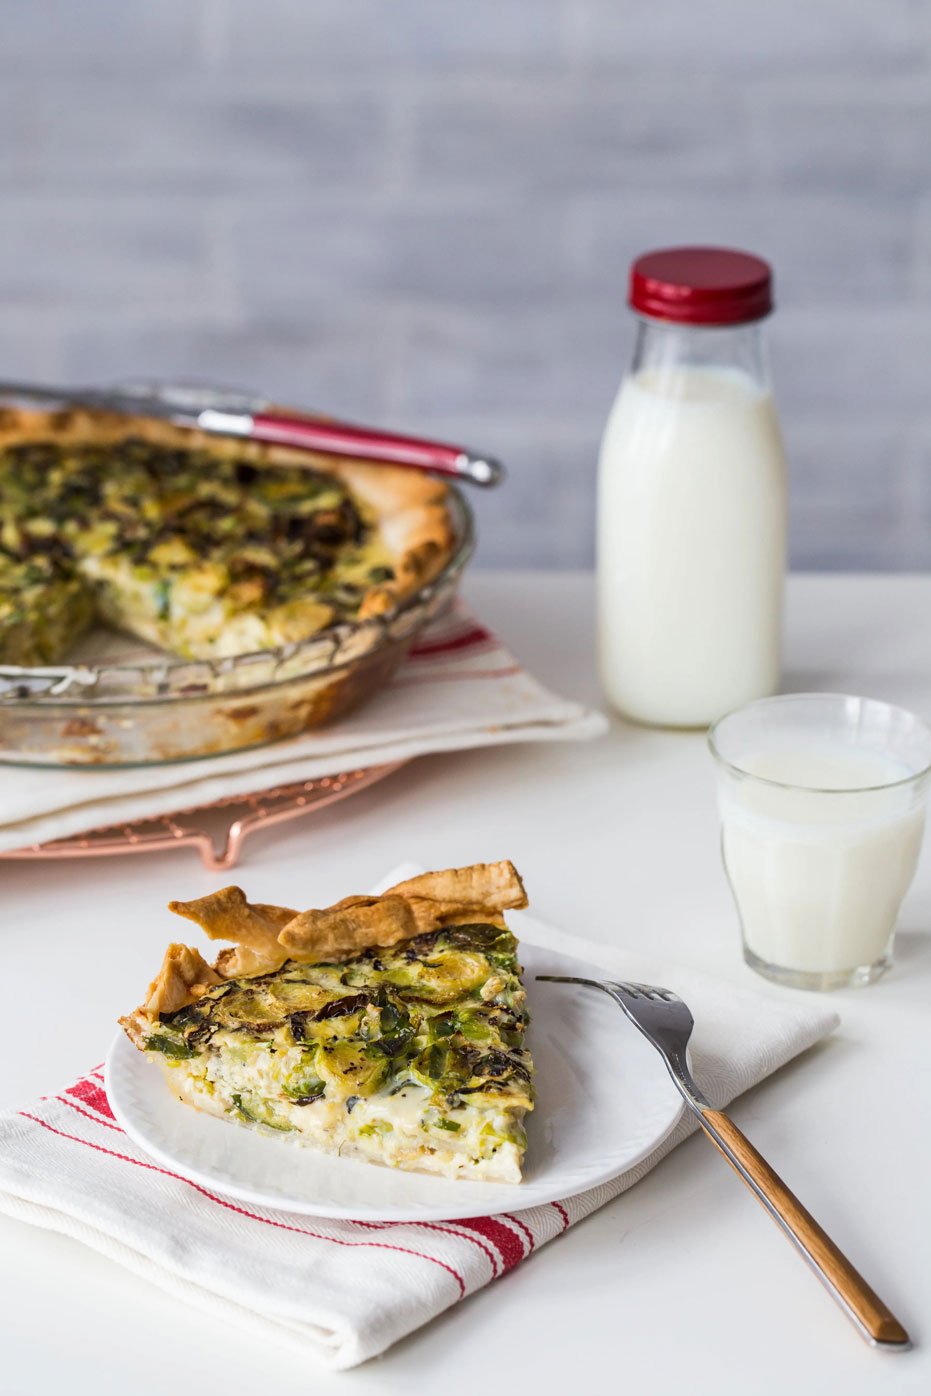 piece of brussel sprout quiche on a plate with a glass of milk, bottle of milk, and the rest of the quiche in the background.